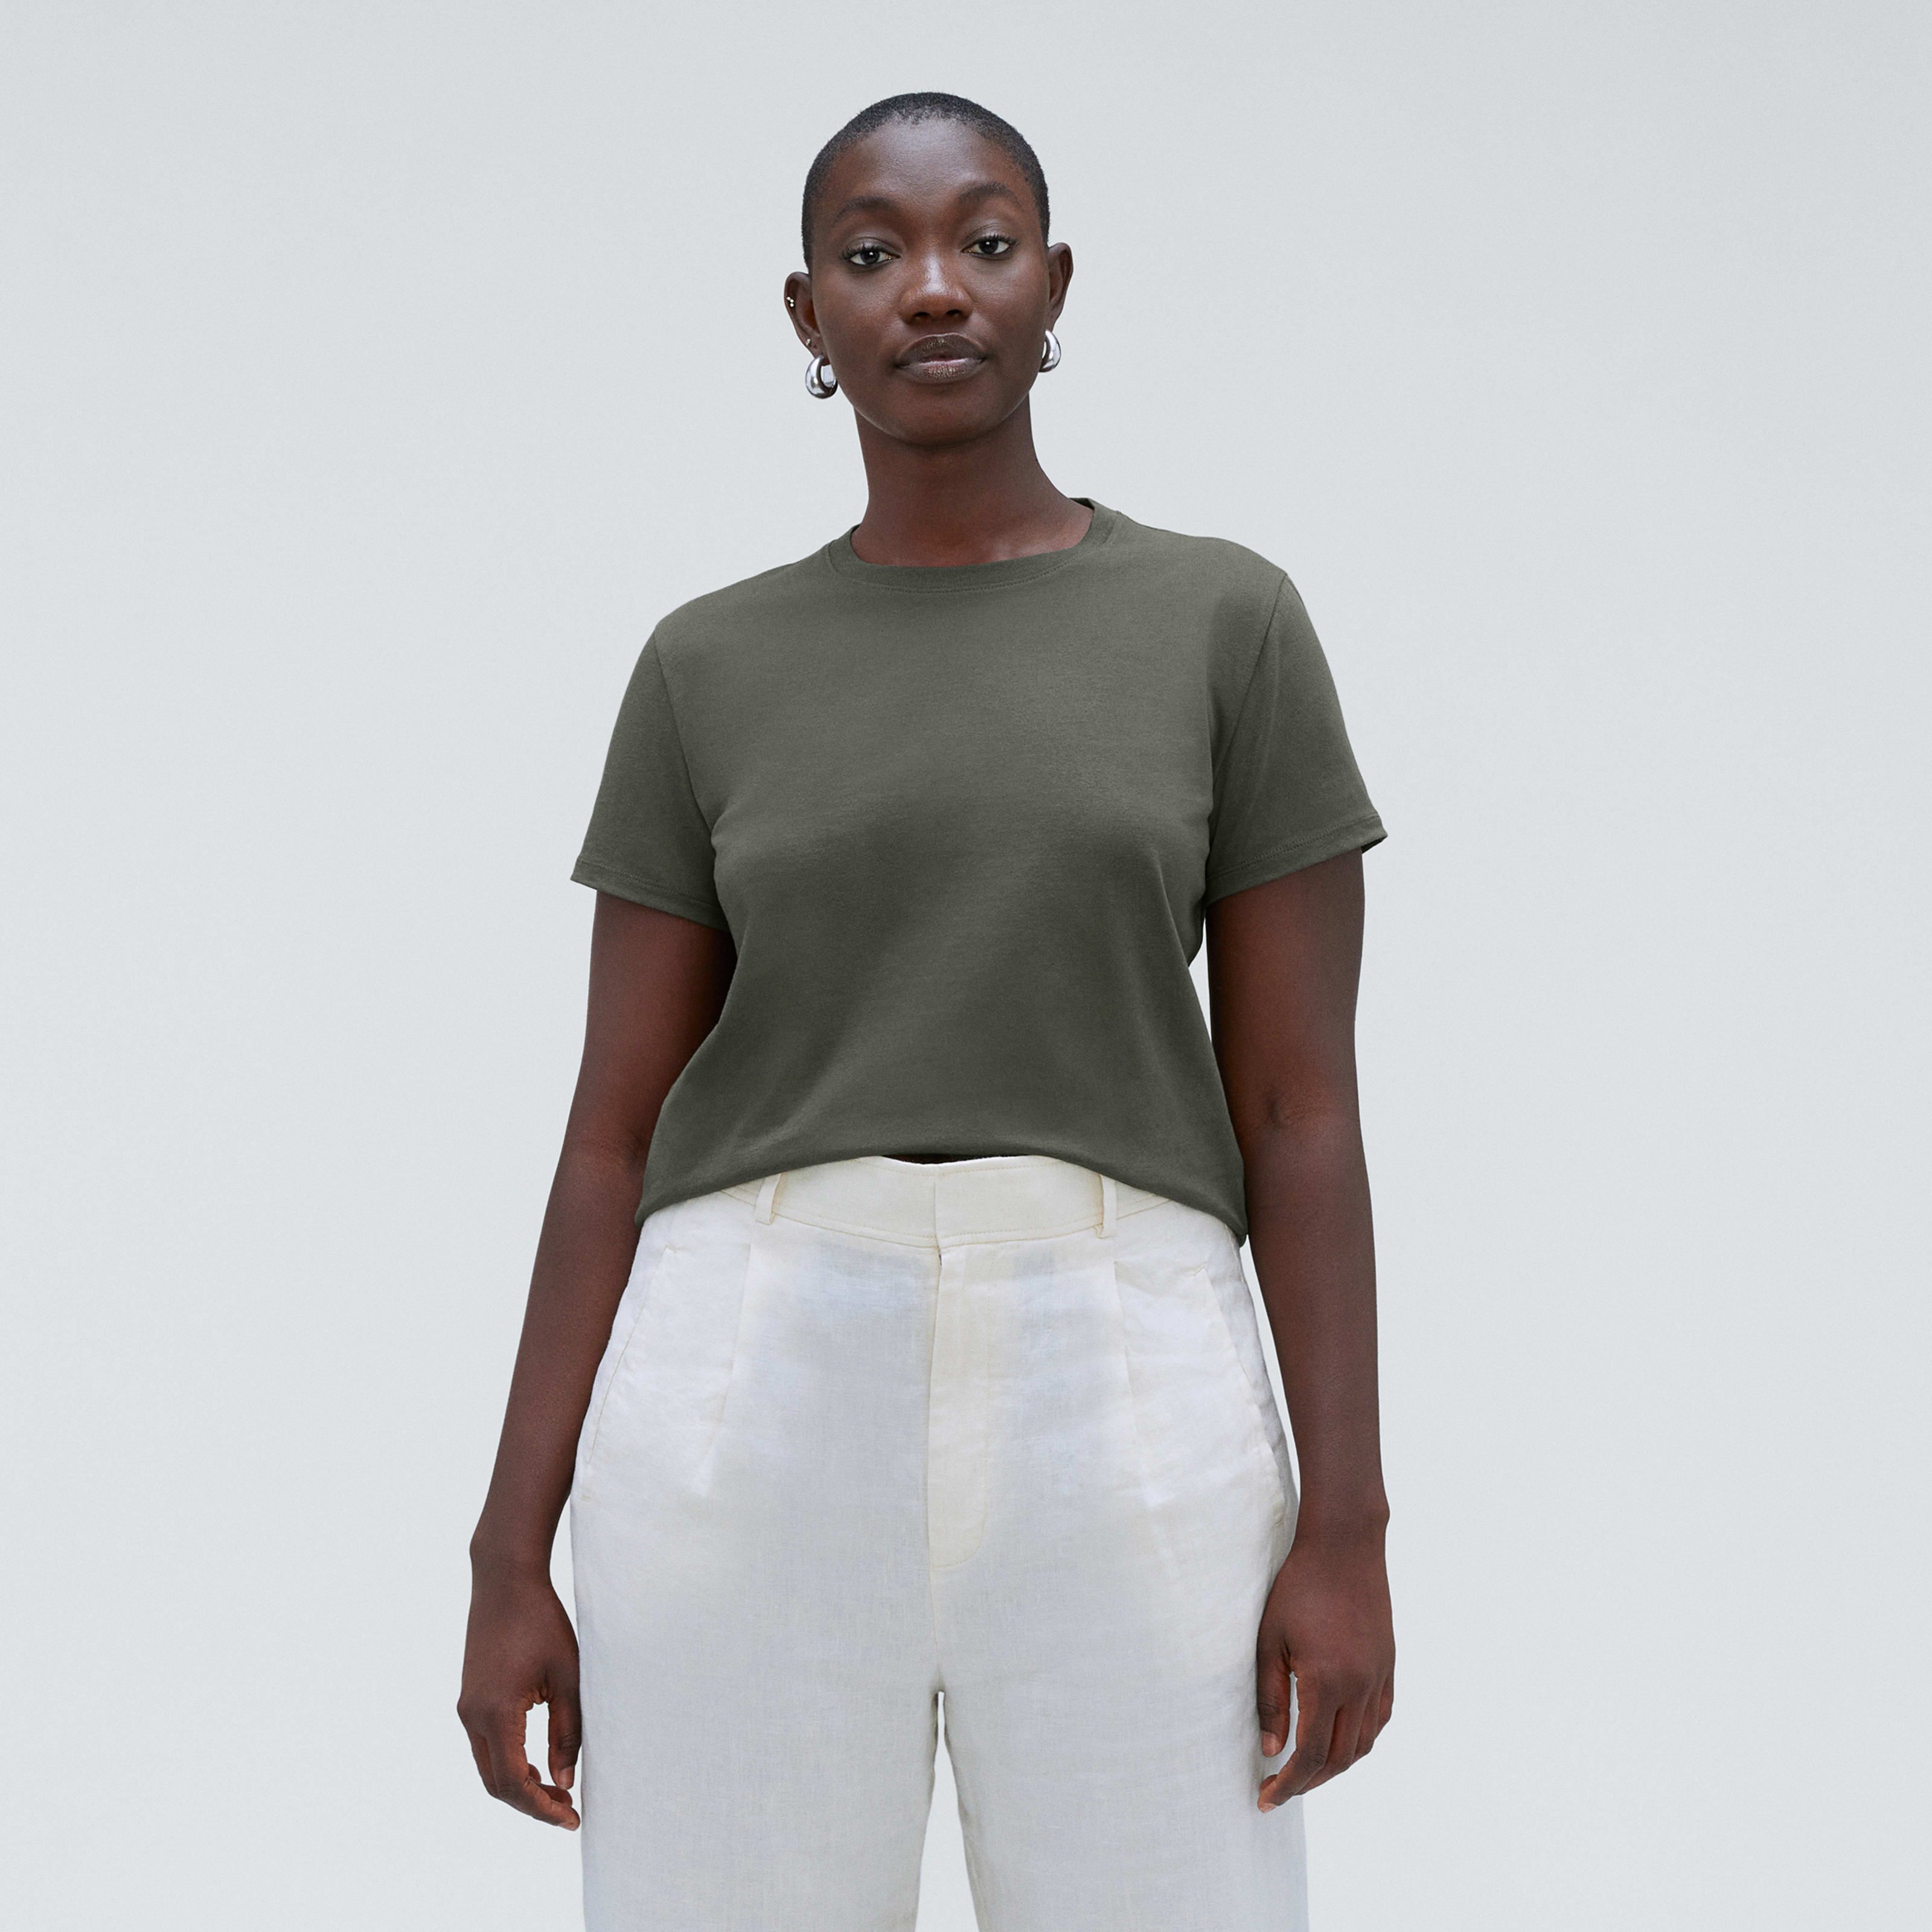 Women's Organic Cotton Box-Cut T-Shirt by Everlane in Olive, Size L | Everlane